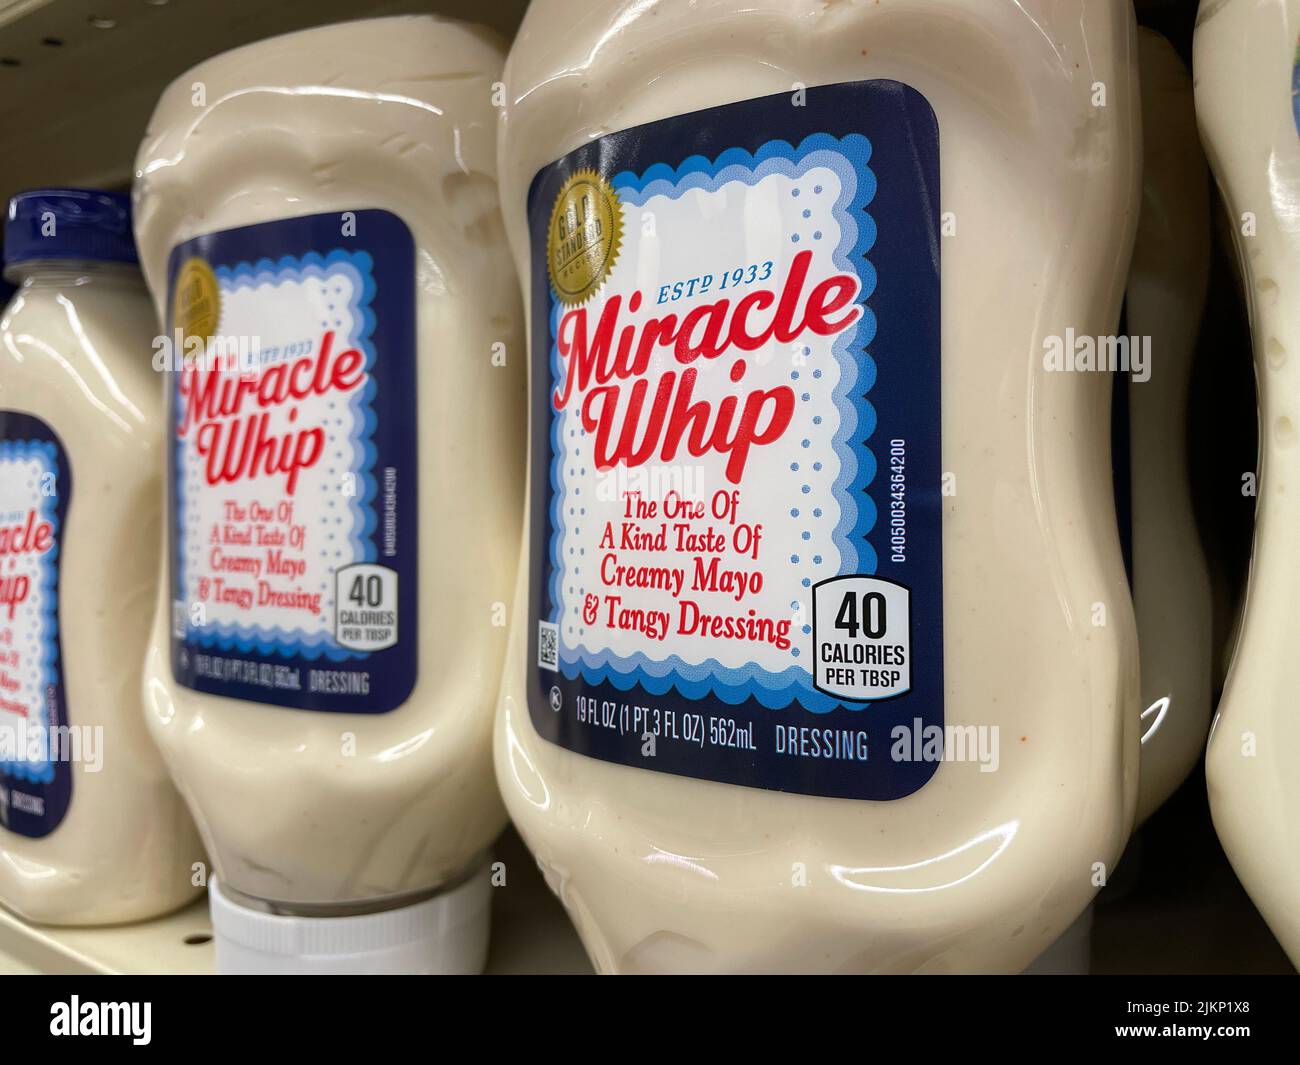 https://c8.alamy.com/comp/2JKP1X8/a-retail-grocery-store-shelf-with-miracle-whip-mayo-2JKP1X8.jpg